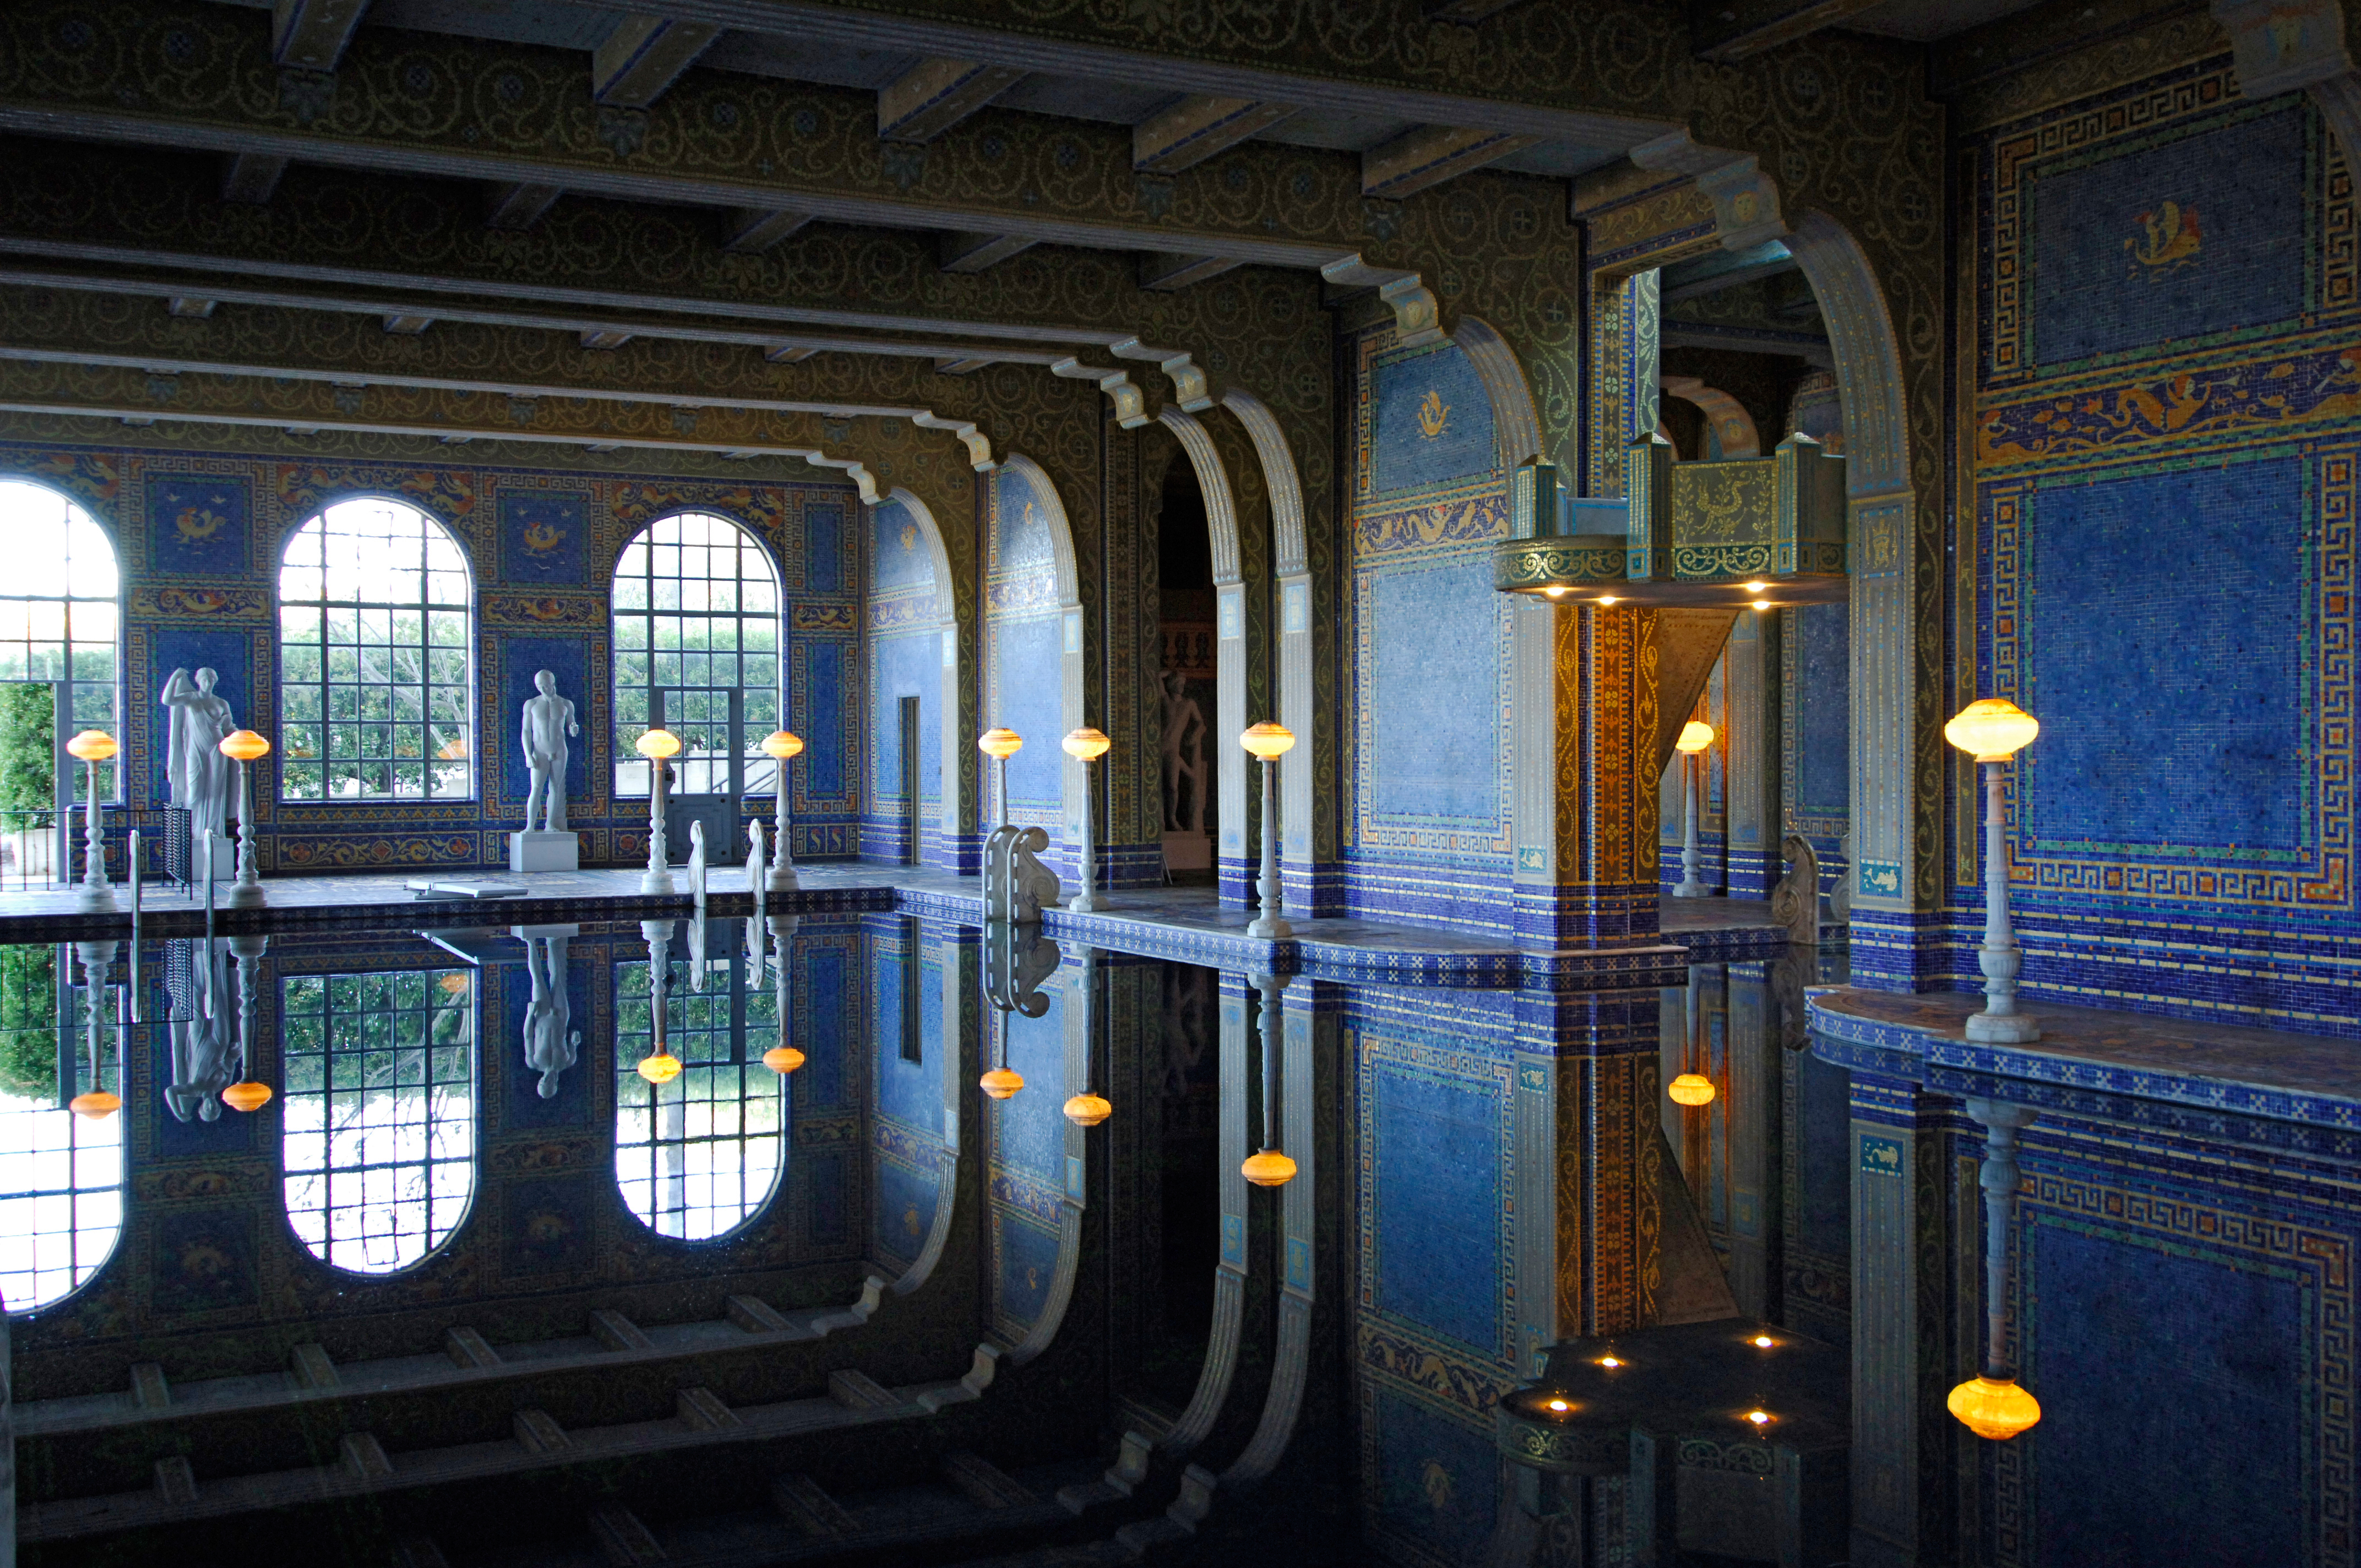 Indoor Pool at Hearst Castle, designed in style of Roman baths.